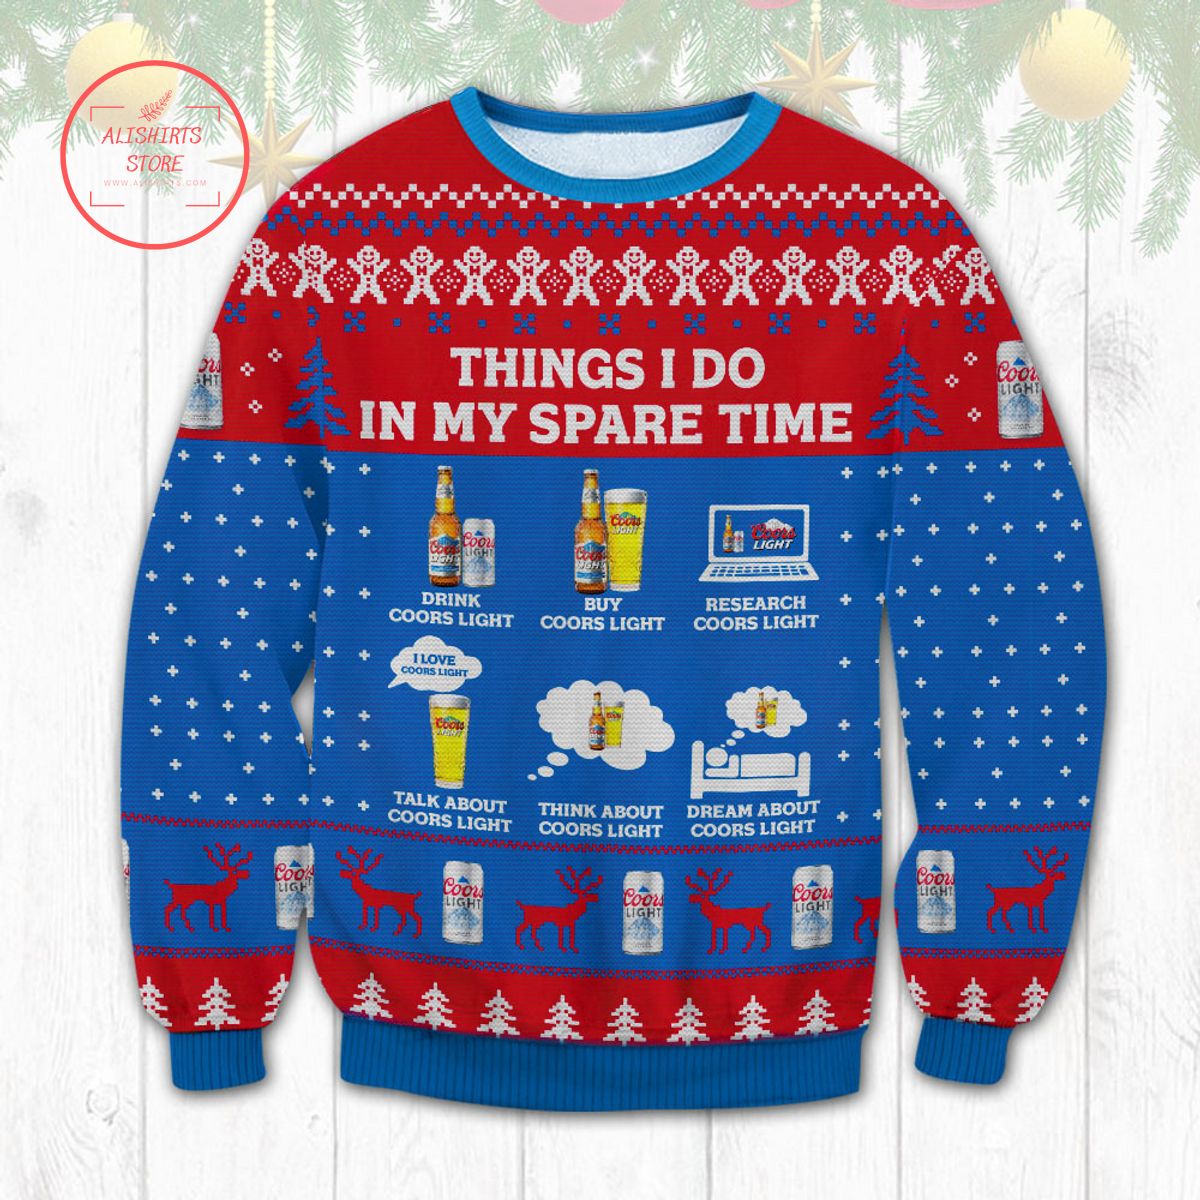 Coors Light Spare Time Ugly Christmas Sweater